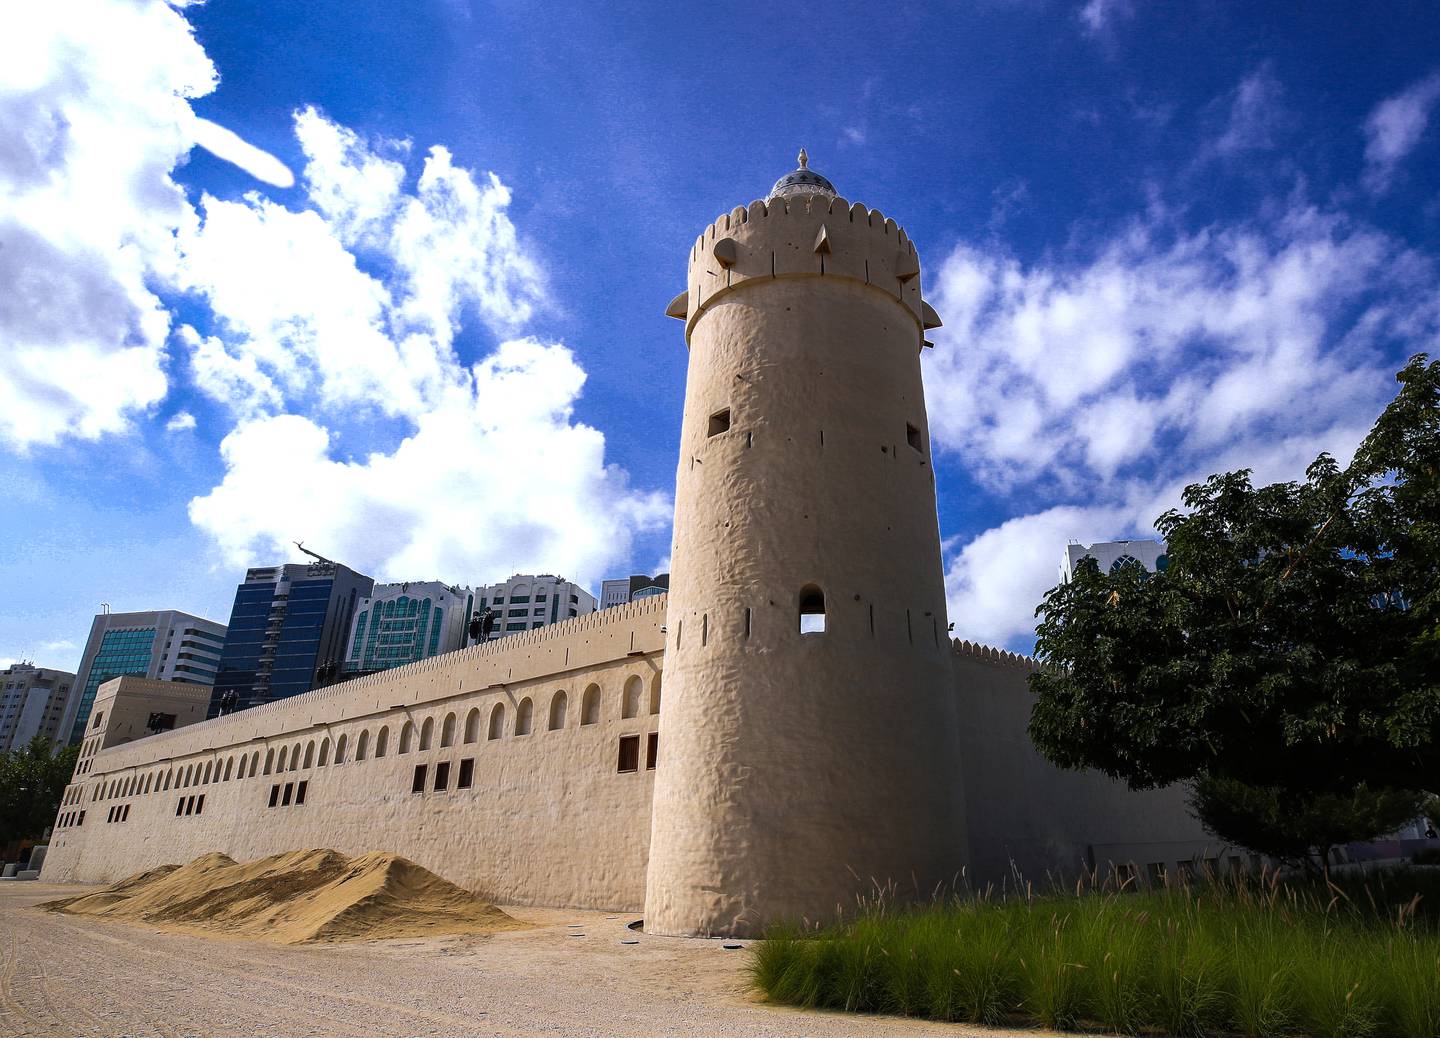 Qasr Al Hosn is Abu Dhabi's oldest standing structure. Victor Besa / The National